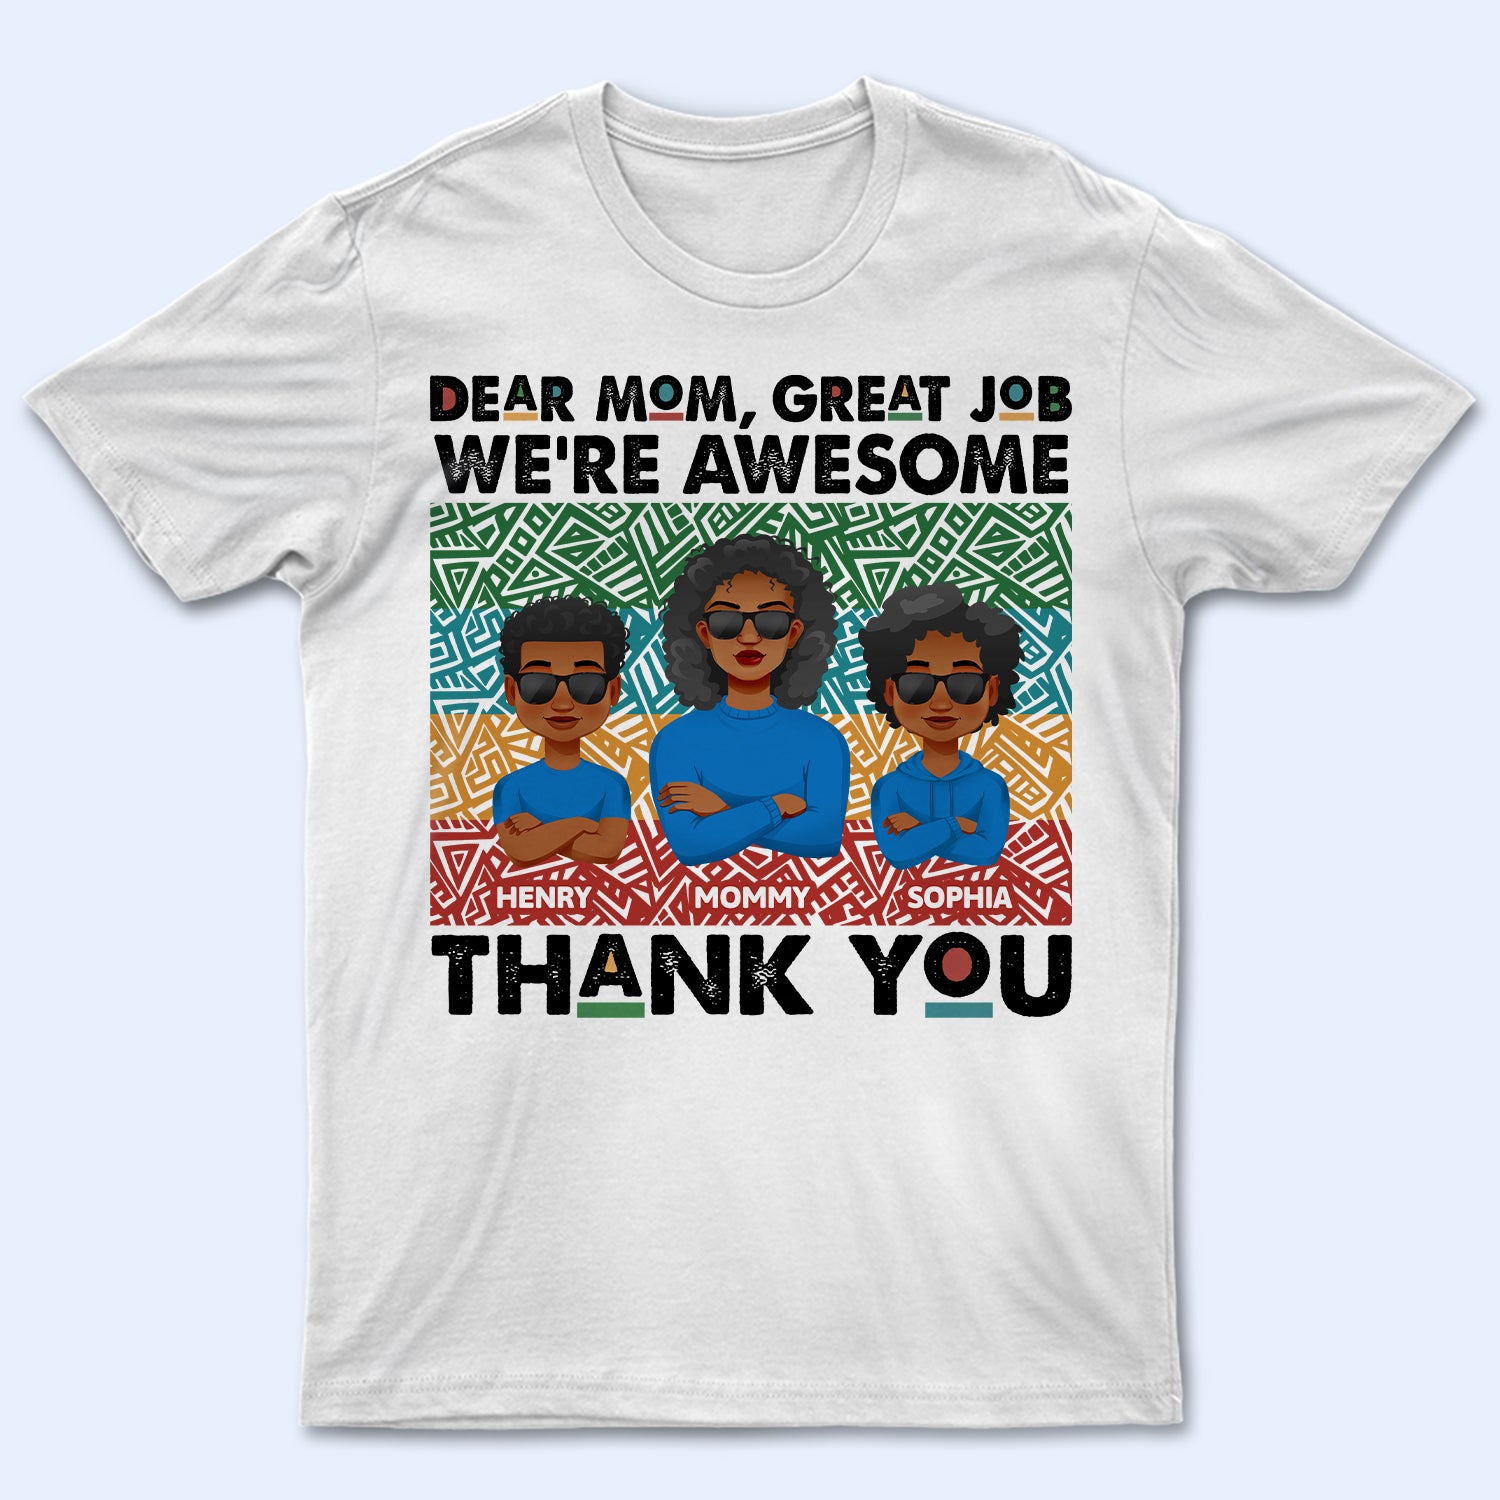 Dear Mom Great Job We Are Awesome Wild Palette - Birthday, Loving Gift For Mum, Mother, Nana, Grandma - Personalized T Shirt